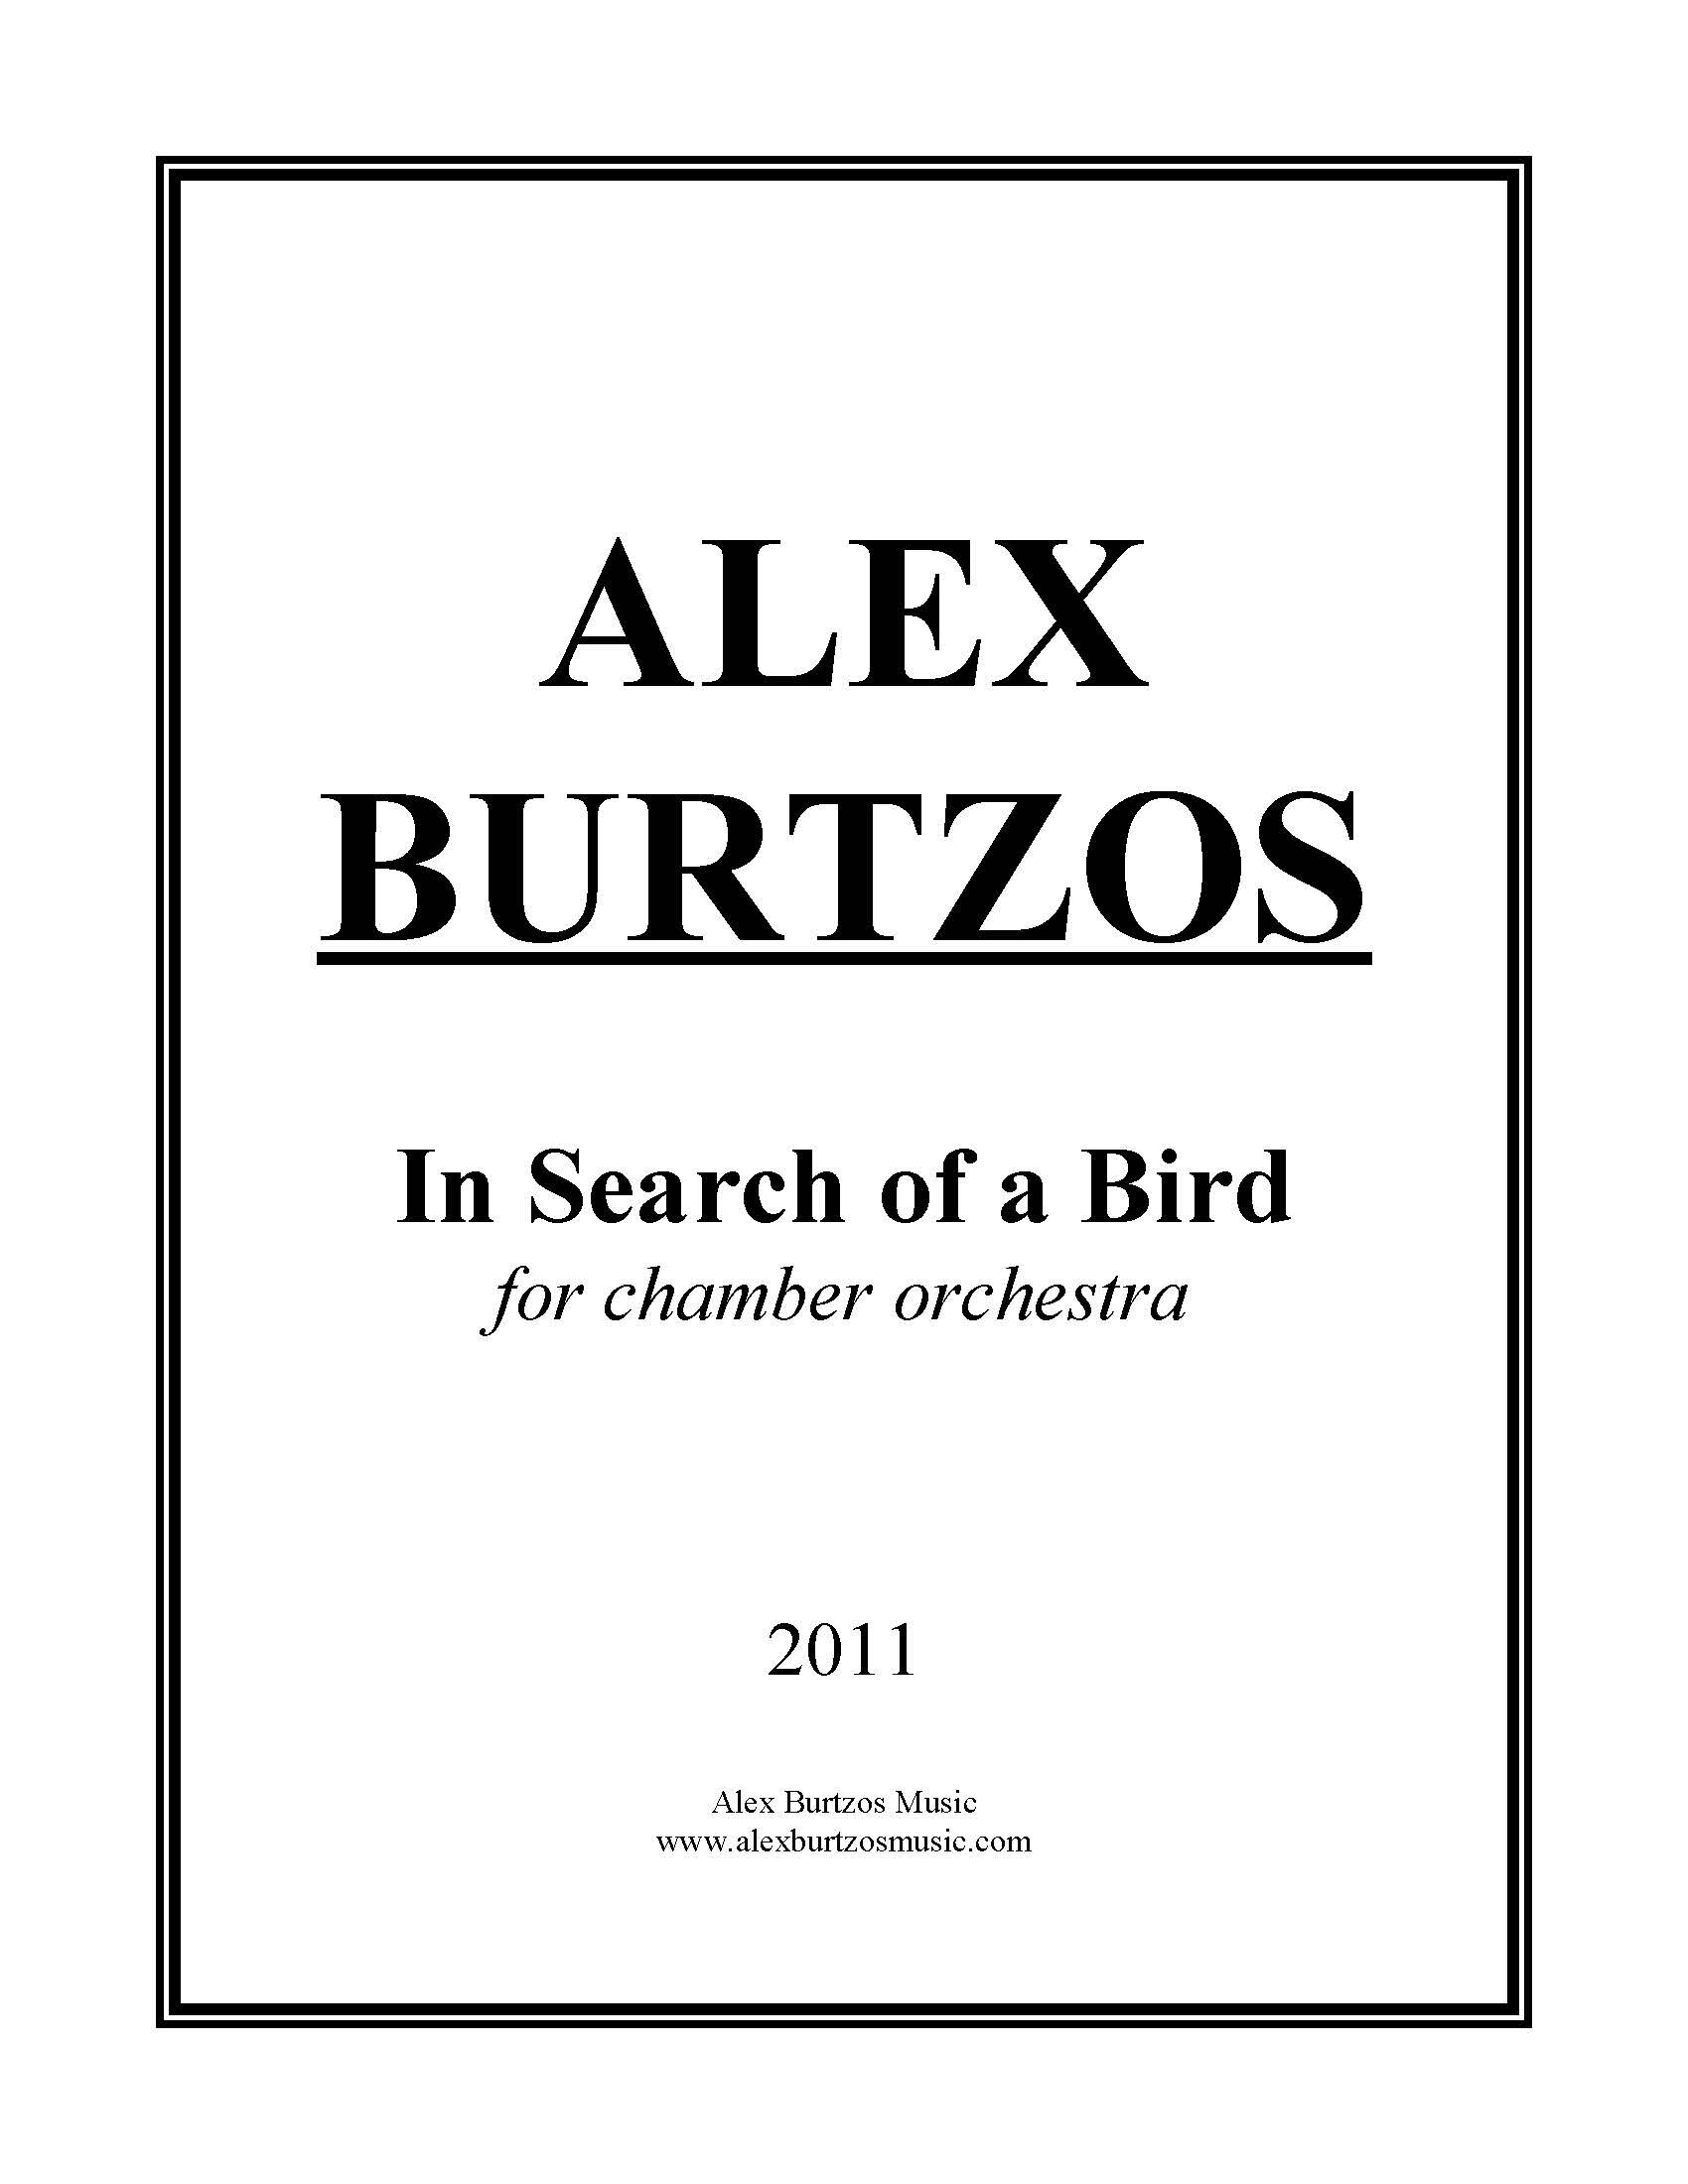 In Search of a Bird - Complete Score_Page_01.jpg